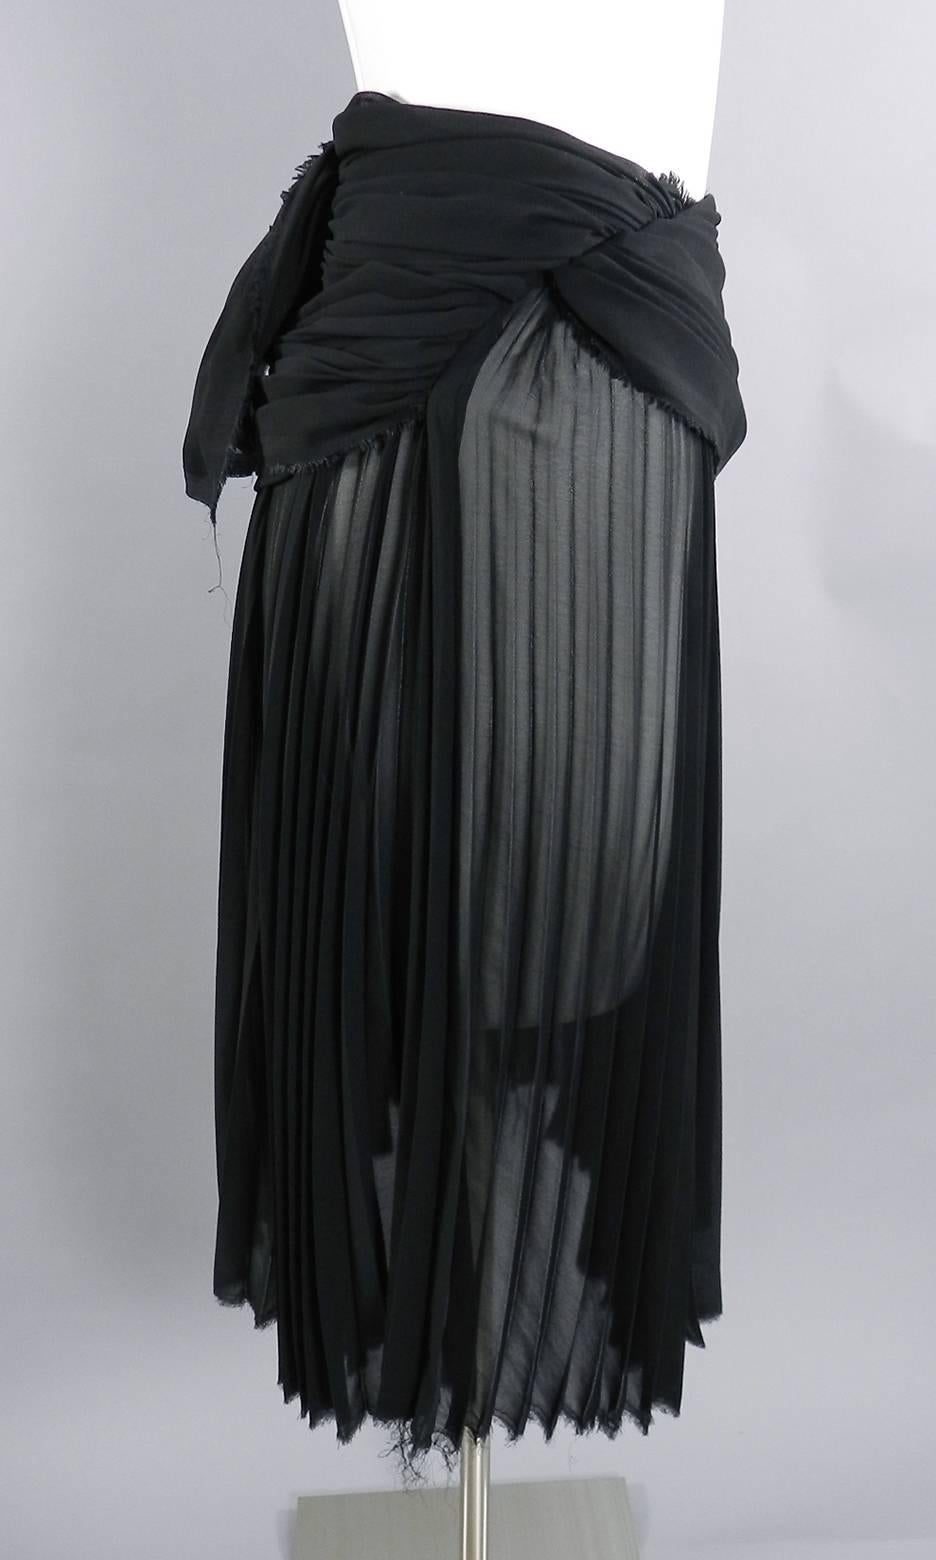 Comme des Garcons vintage sheer black pleated skirt. Metal size zipper, sheer accordion pleat body, and layered waistline. Tagged size SS (USA XS 0-2). Waist measures 26” and is best for 24-26” waist person, semi-full hips, 26” total length.  

We